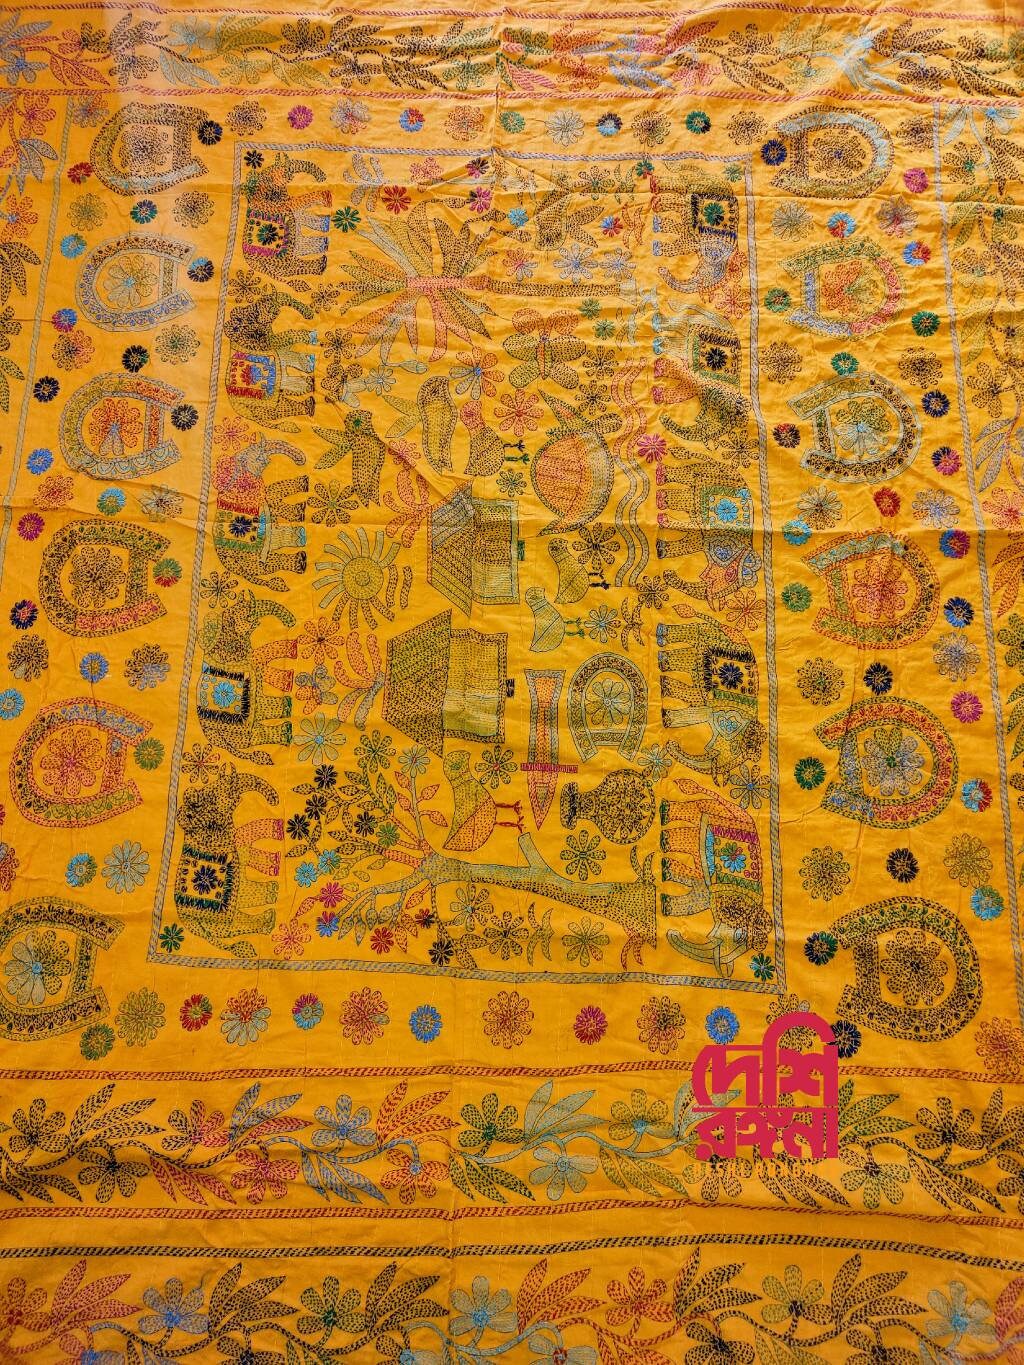 Hand Stitched Nokhsi Kantha, Cotton Bed Cover Quilt, Exclusive Art, Traditional Floral Hand Stitched Art, Made in Jashore, Bangladesh